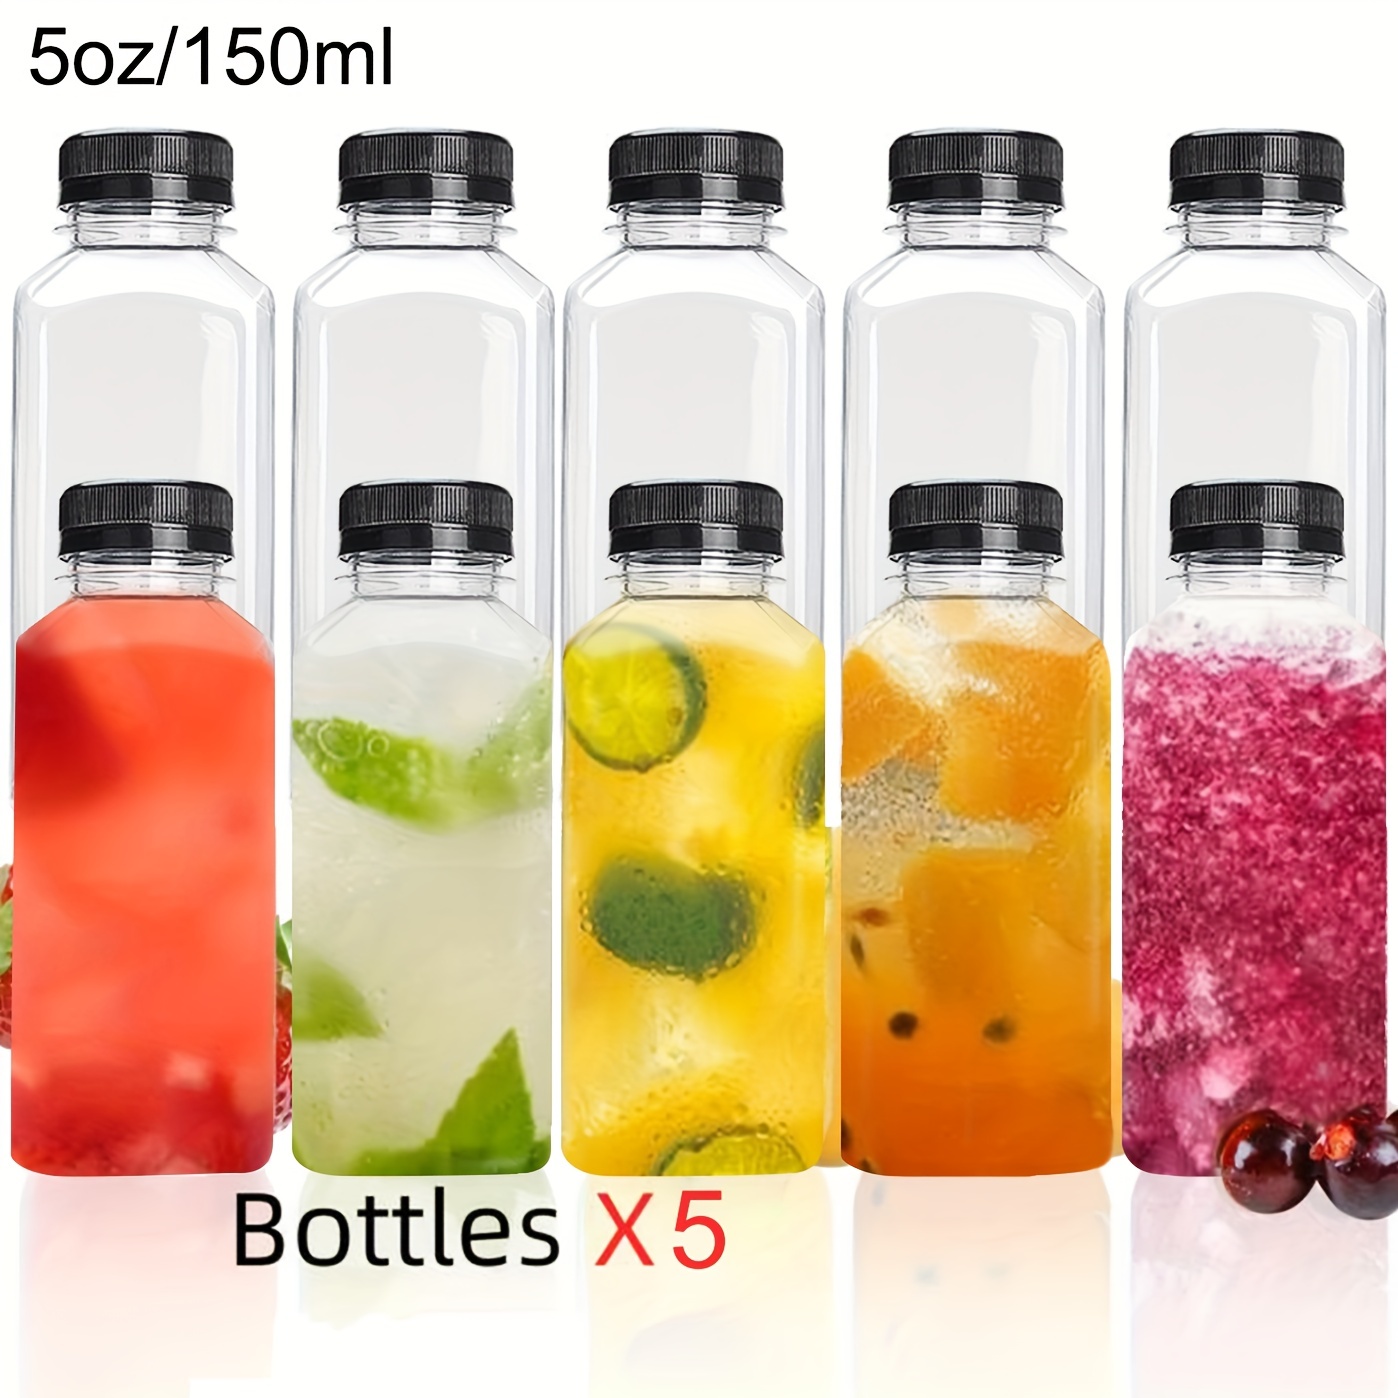 Wholesale Reusable Sauce Container as Cheap but Safe Drinks Containers 